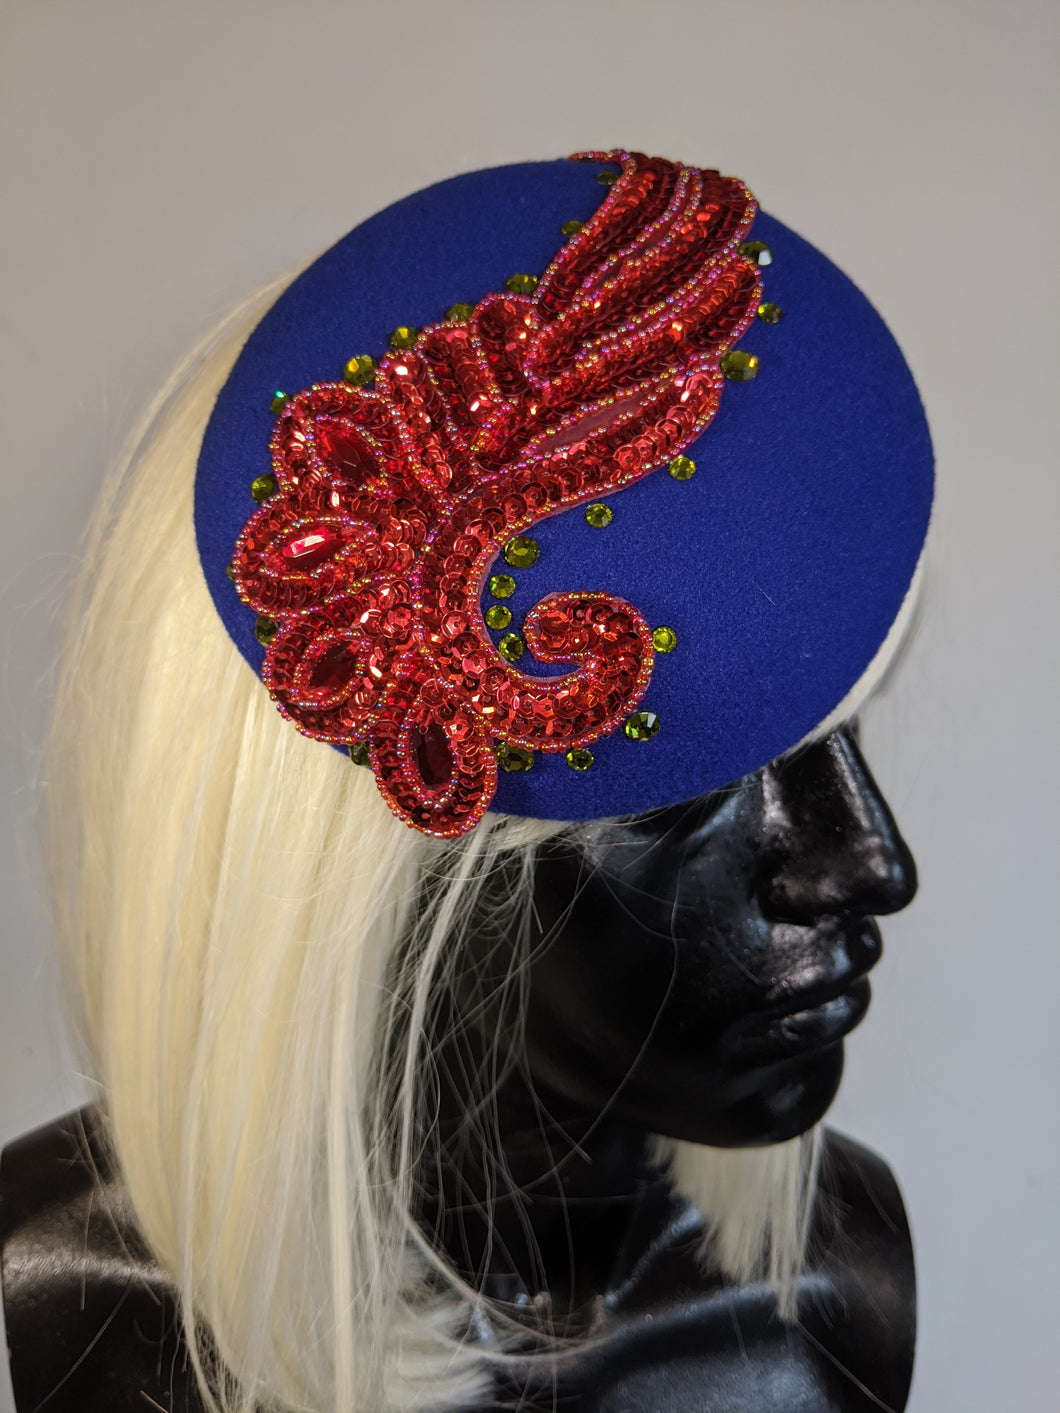 Blue and Red Round Pillbox Hat